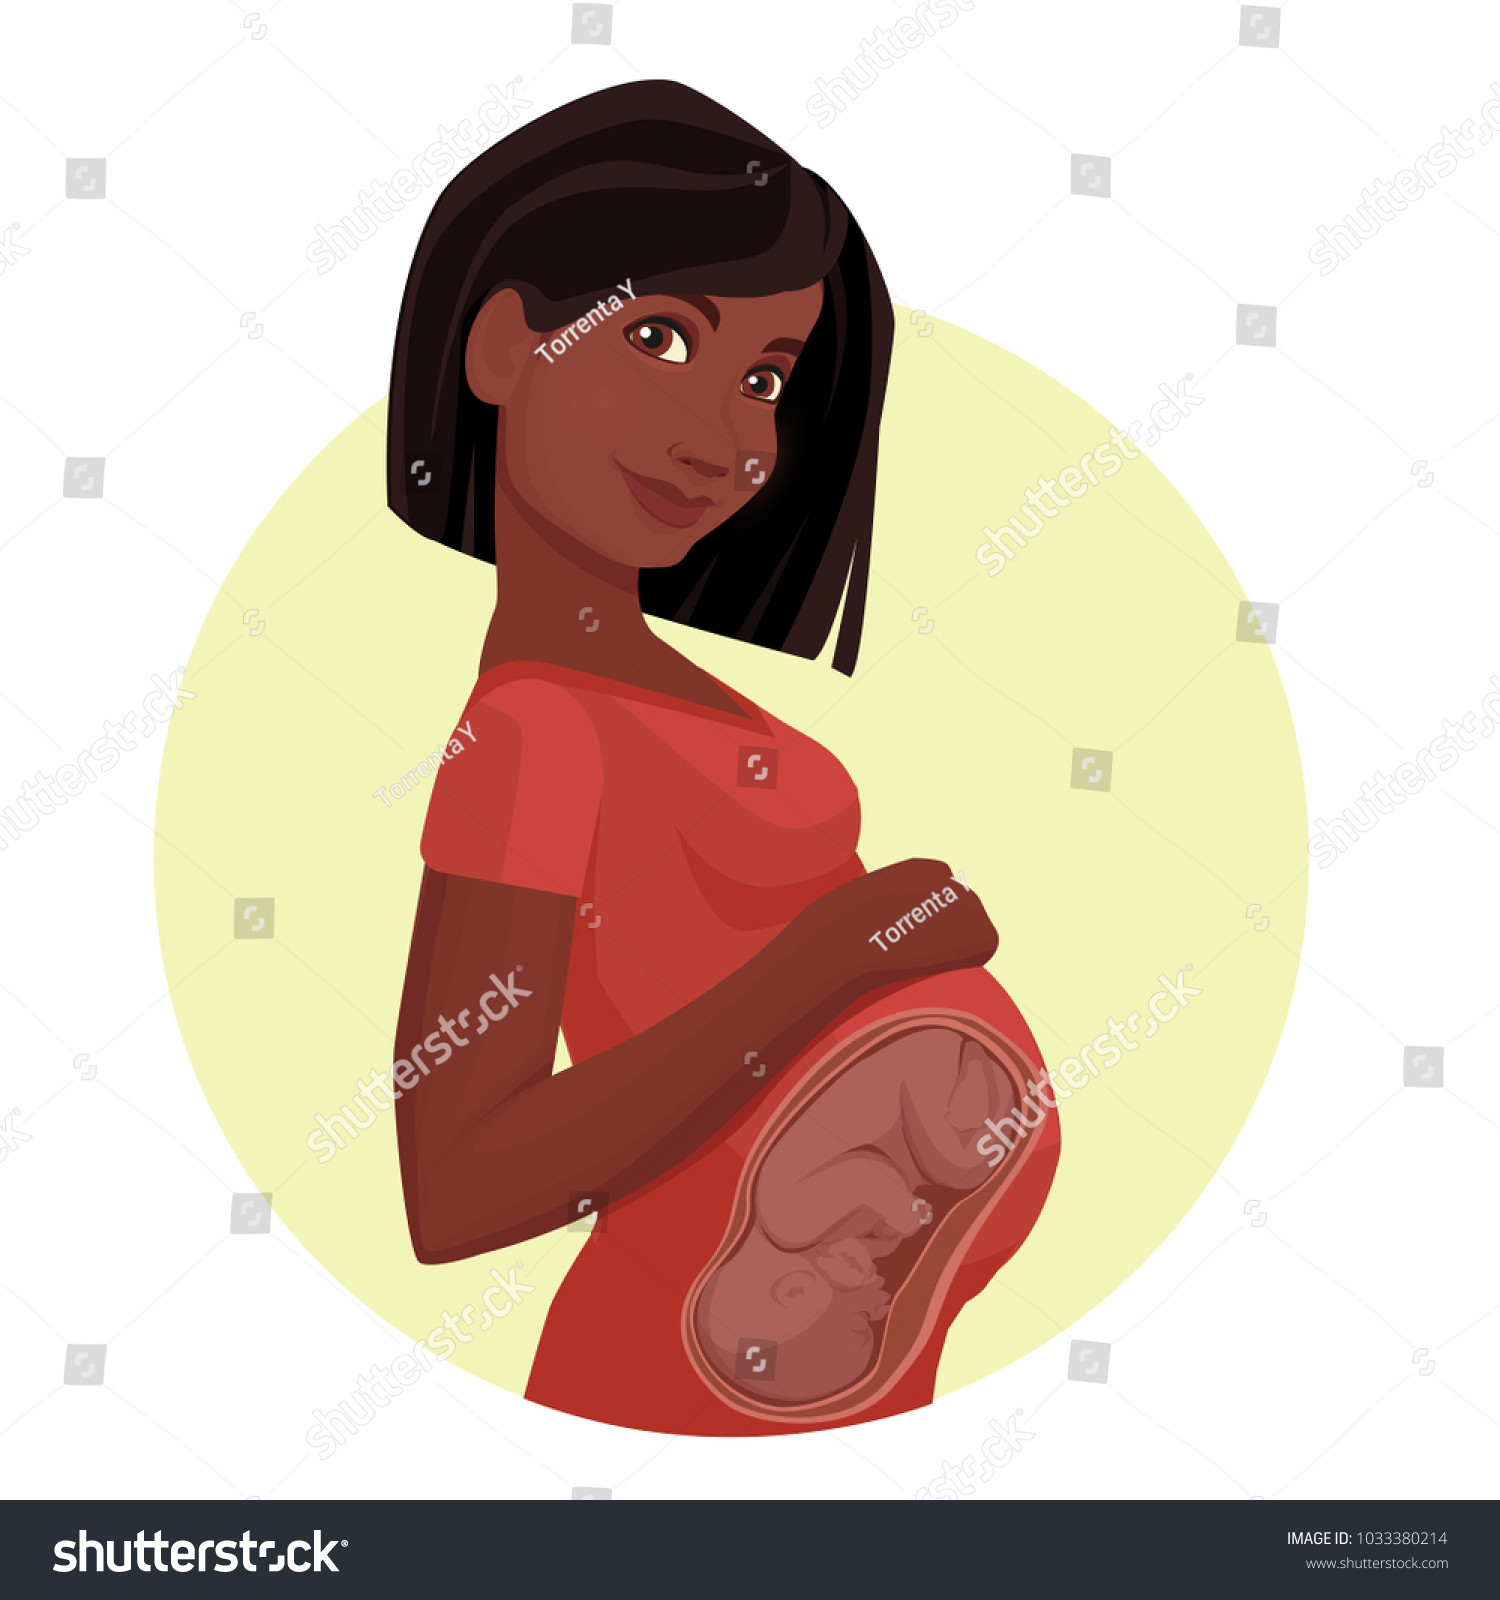 Dark Skinned Pregnant Woman Embryo In The Royalty Free Stock Vector 1033380214 9871